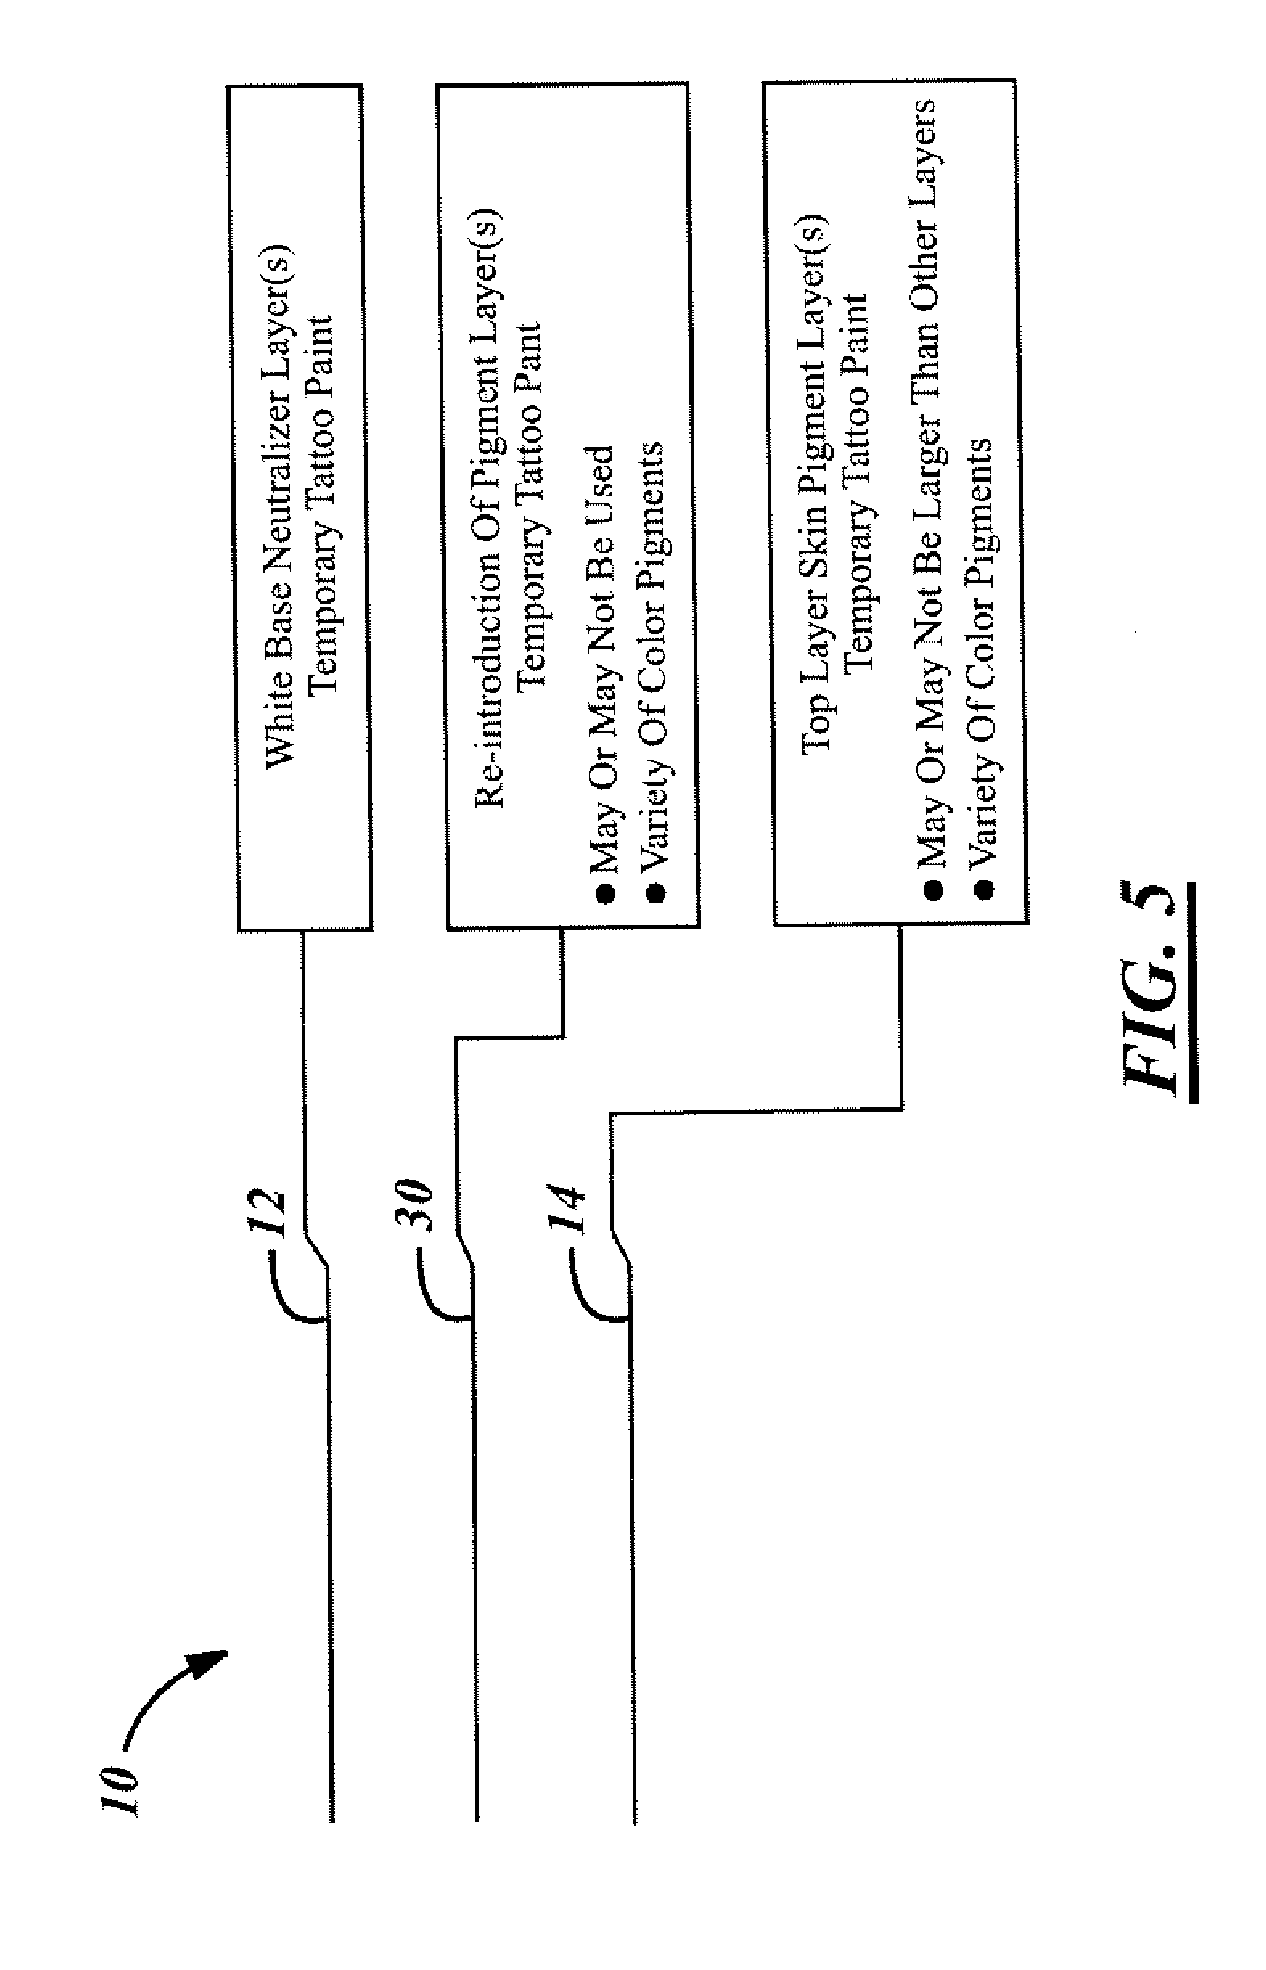 Method And Device For Neutralizing Or Blocking Skin Imperfections